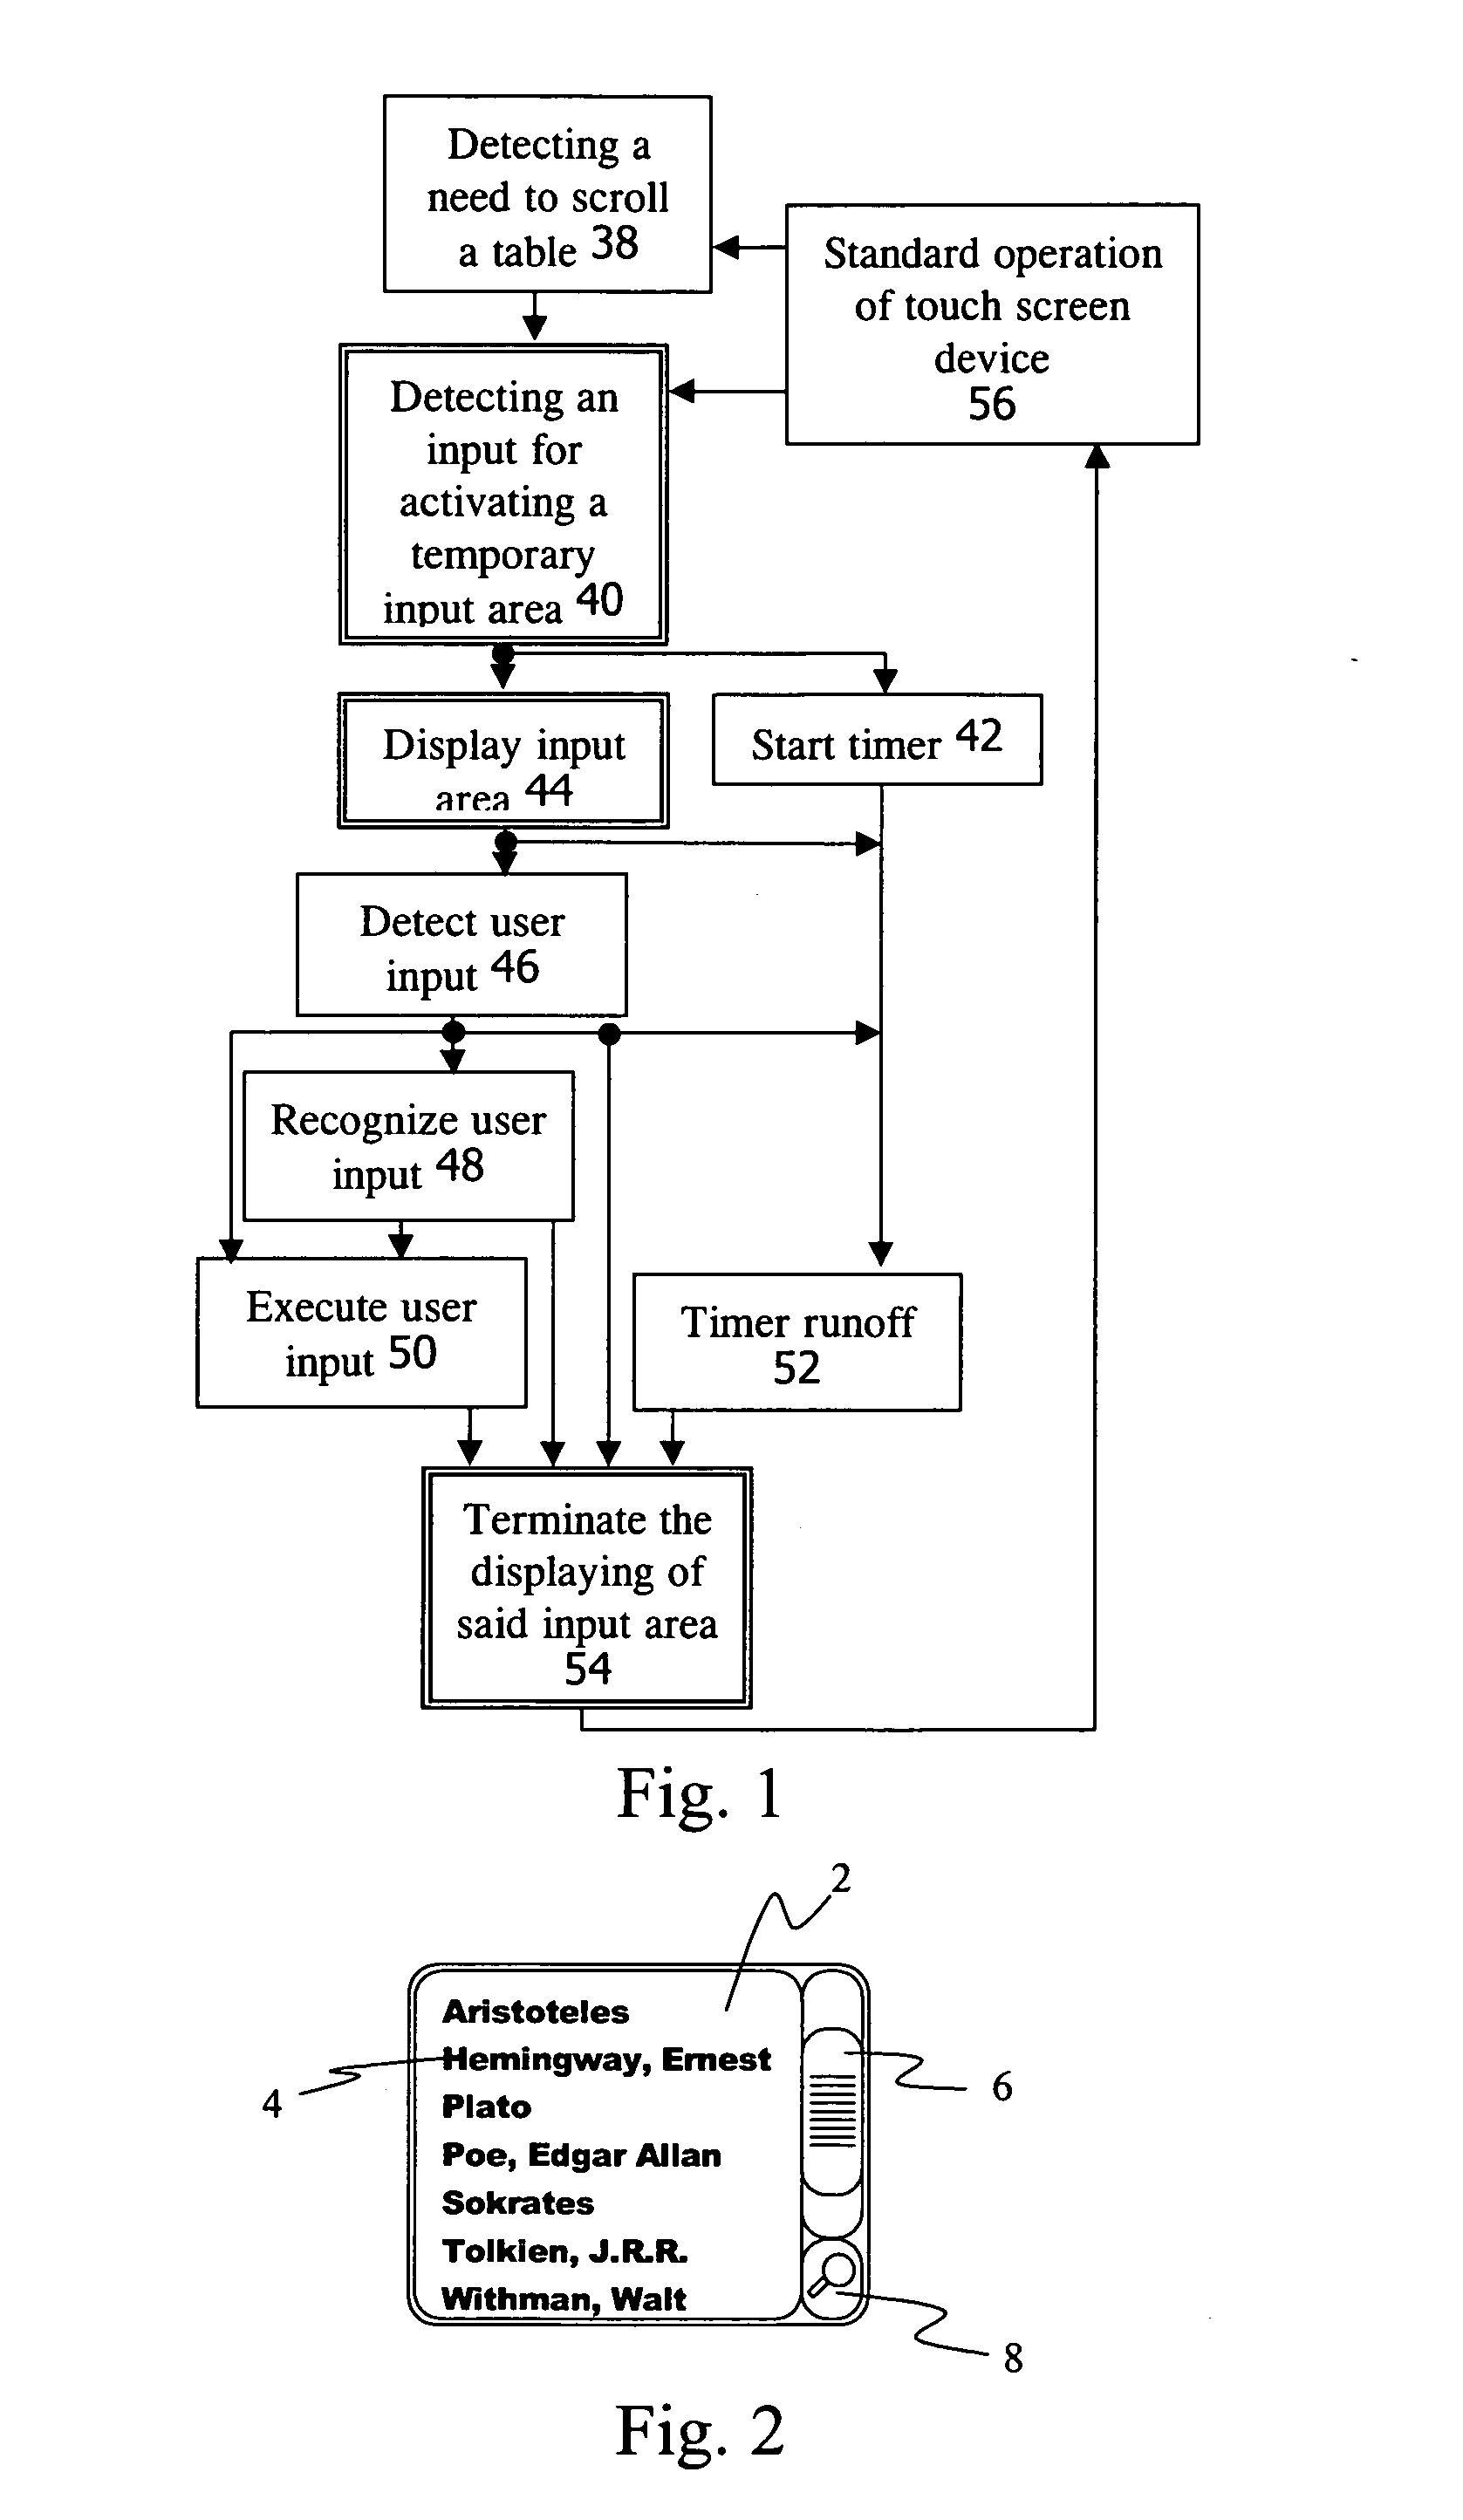 Method and device for operating a user-input area on an electronic display device